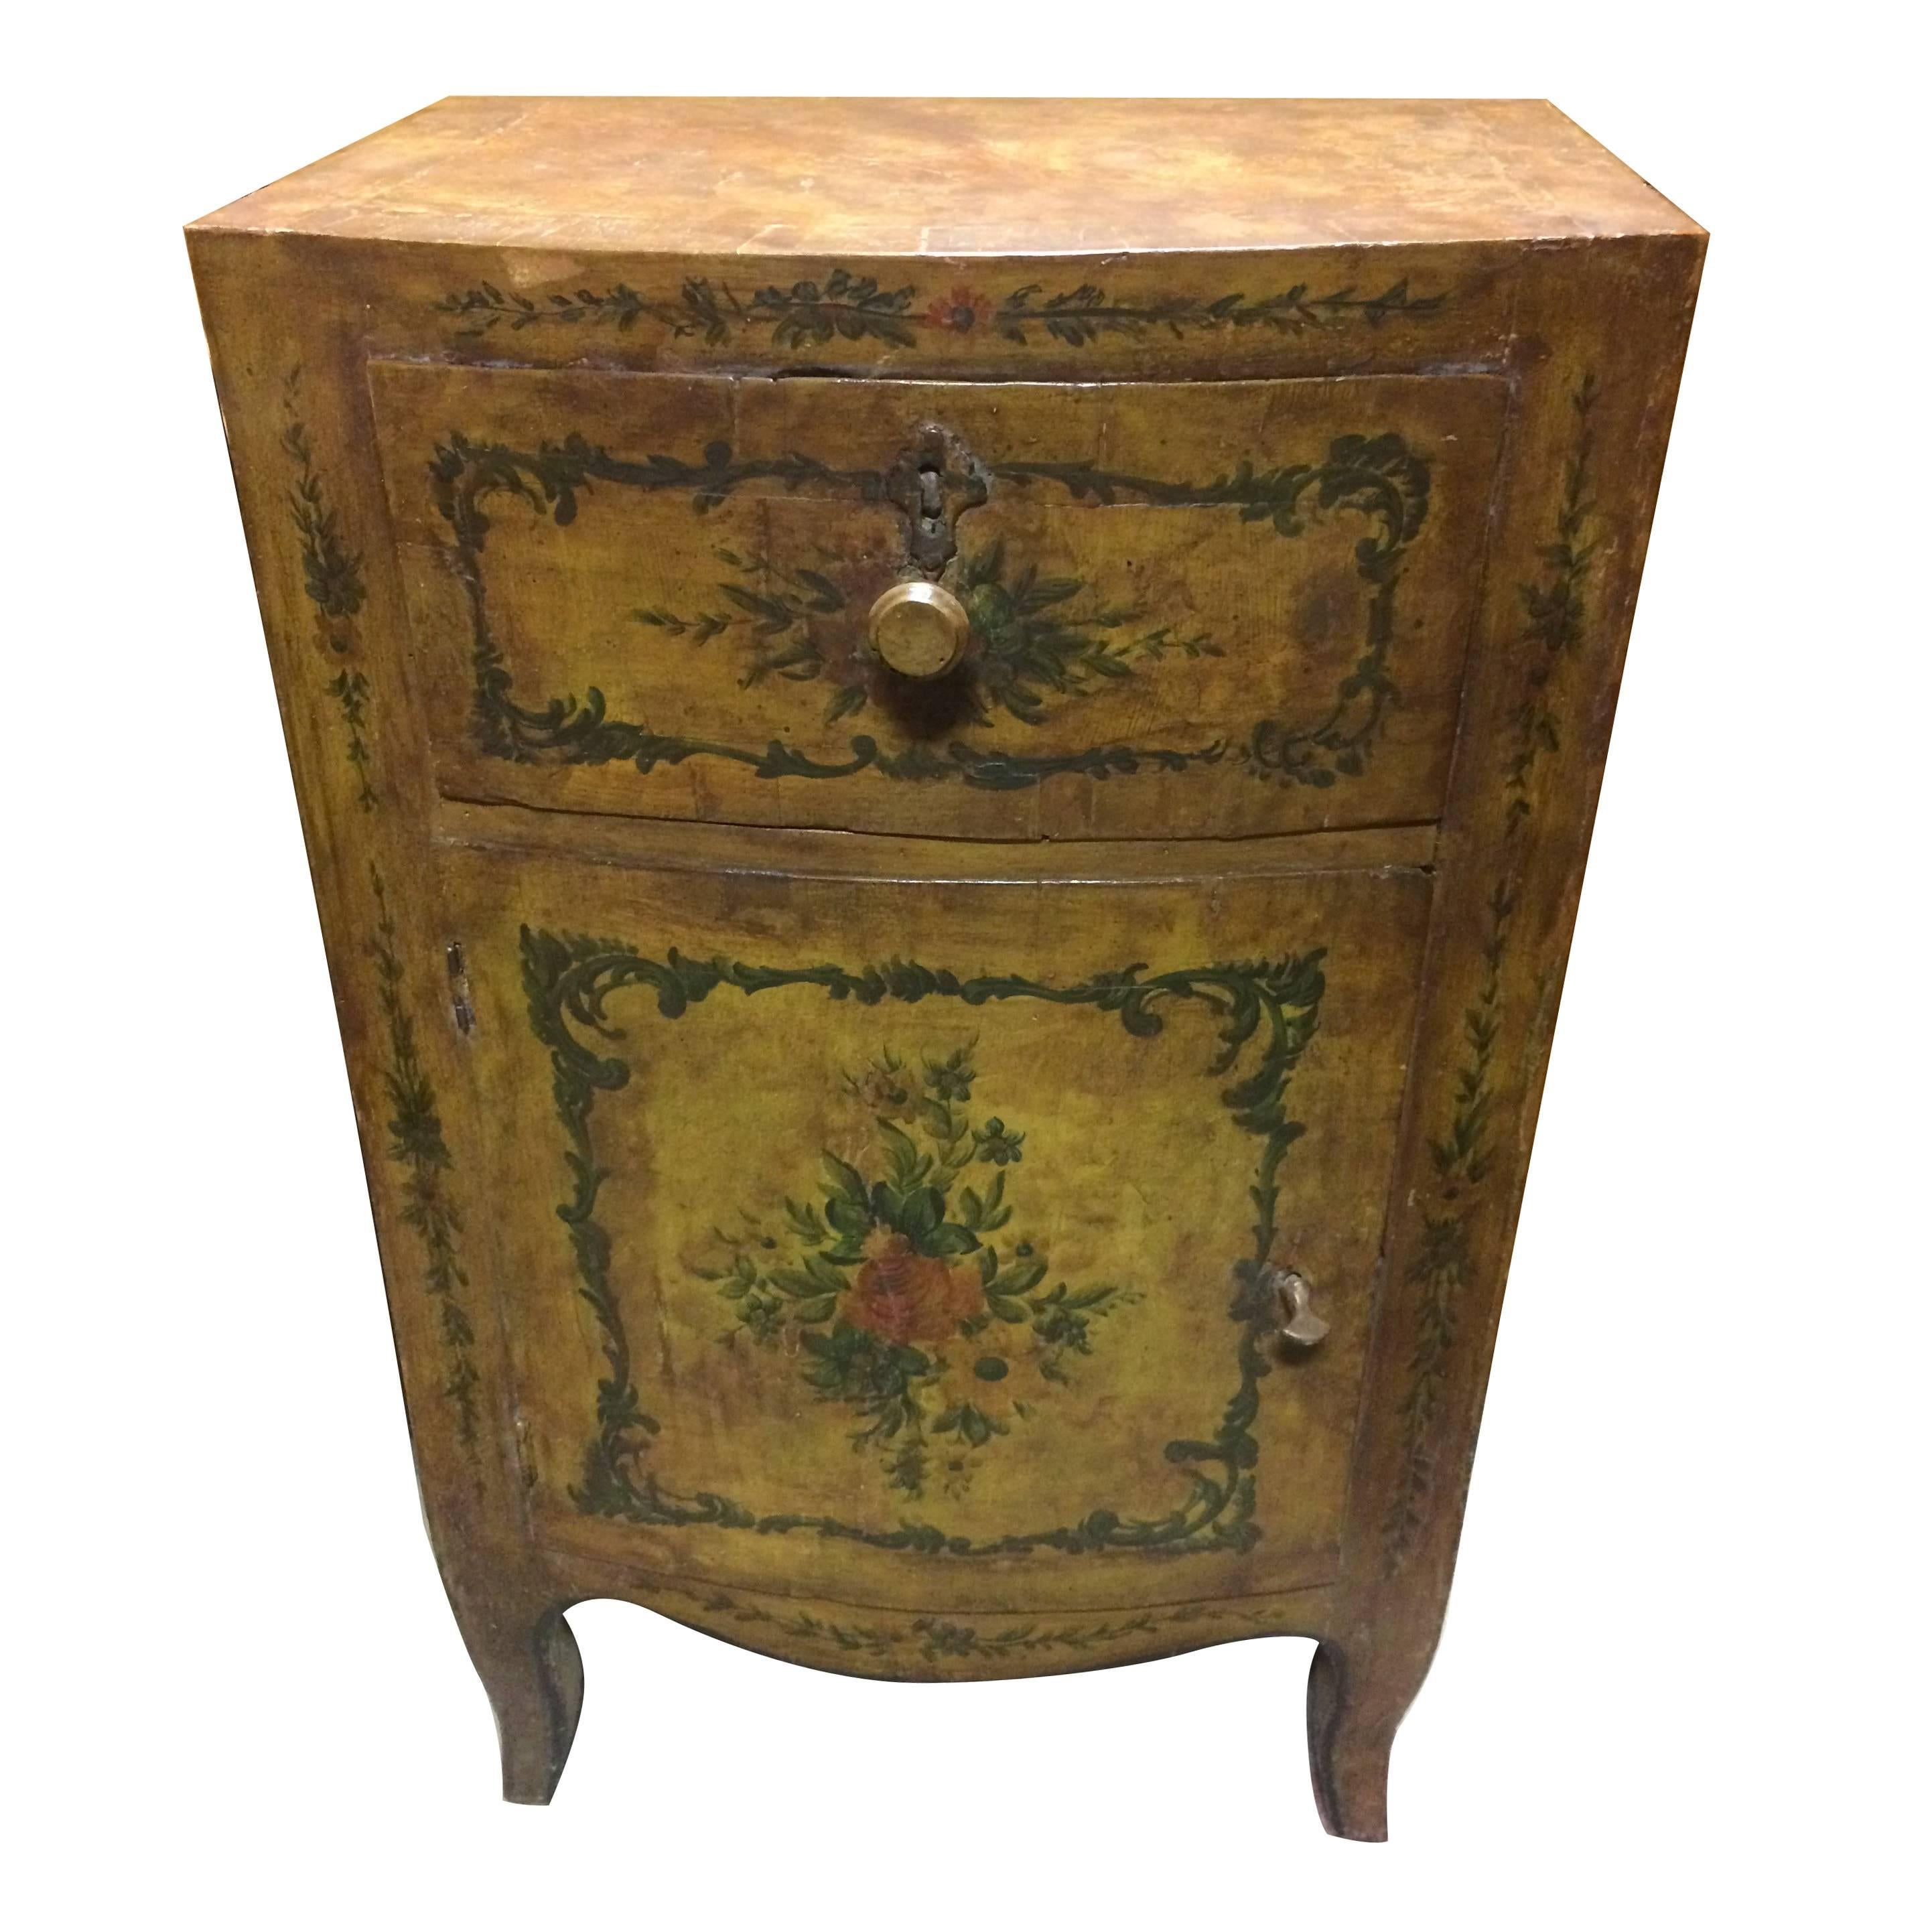 ON SALE Commode 18th C. Venetian Yellow Lacquered Pine with Painted Flowers